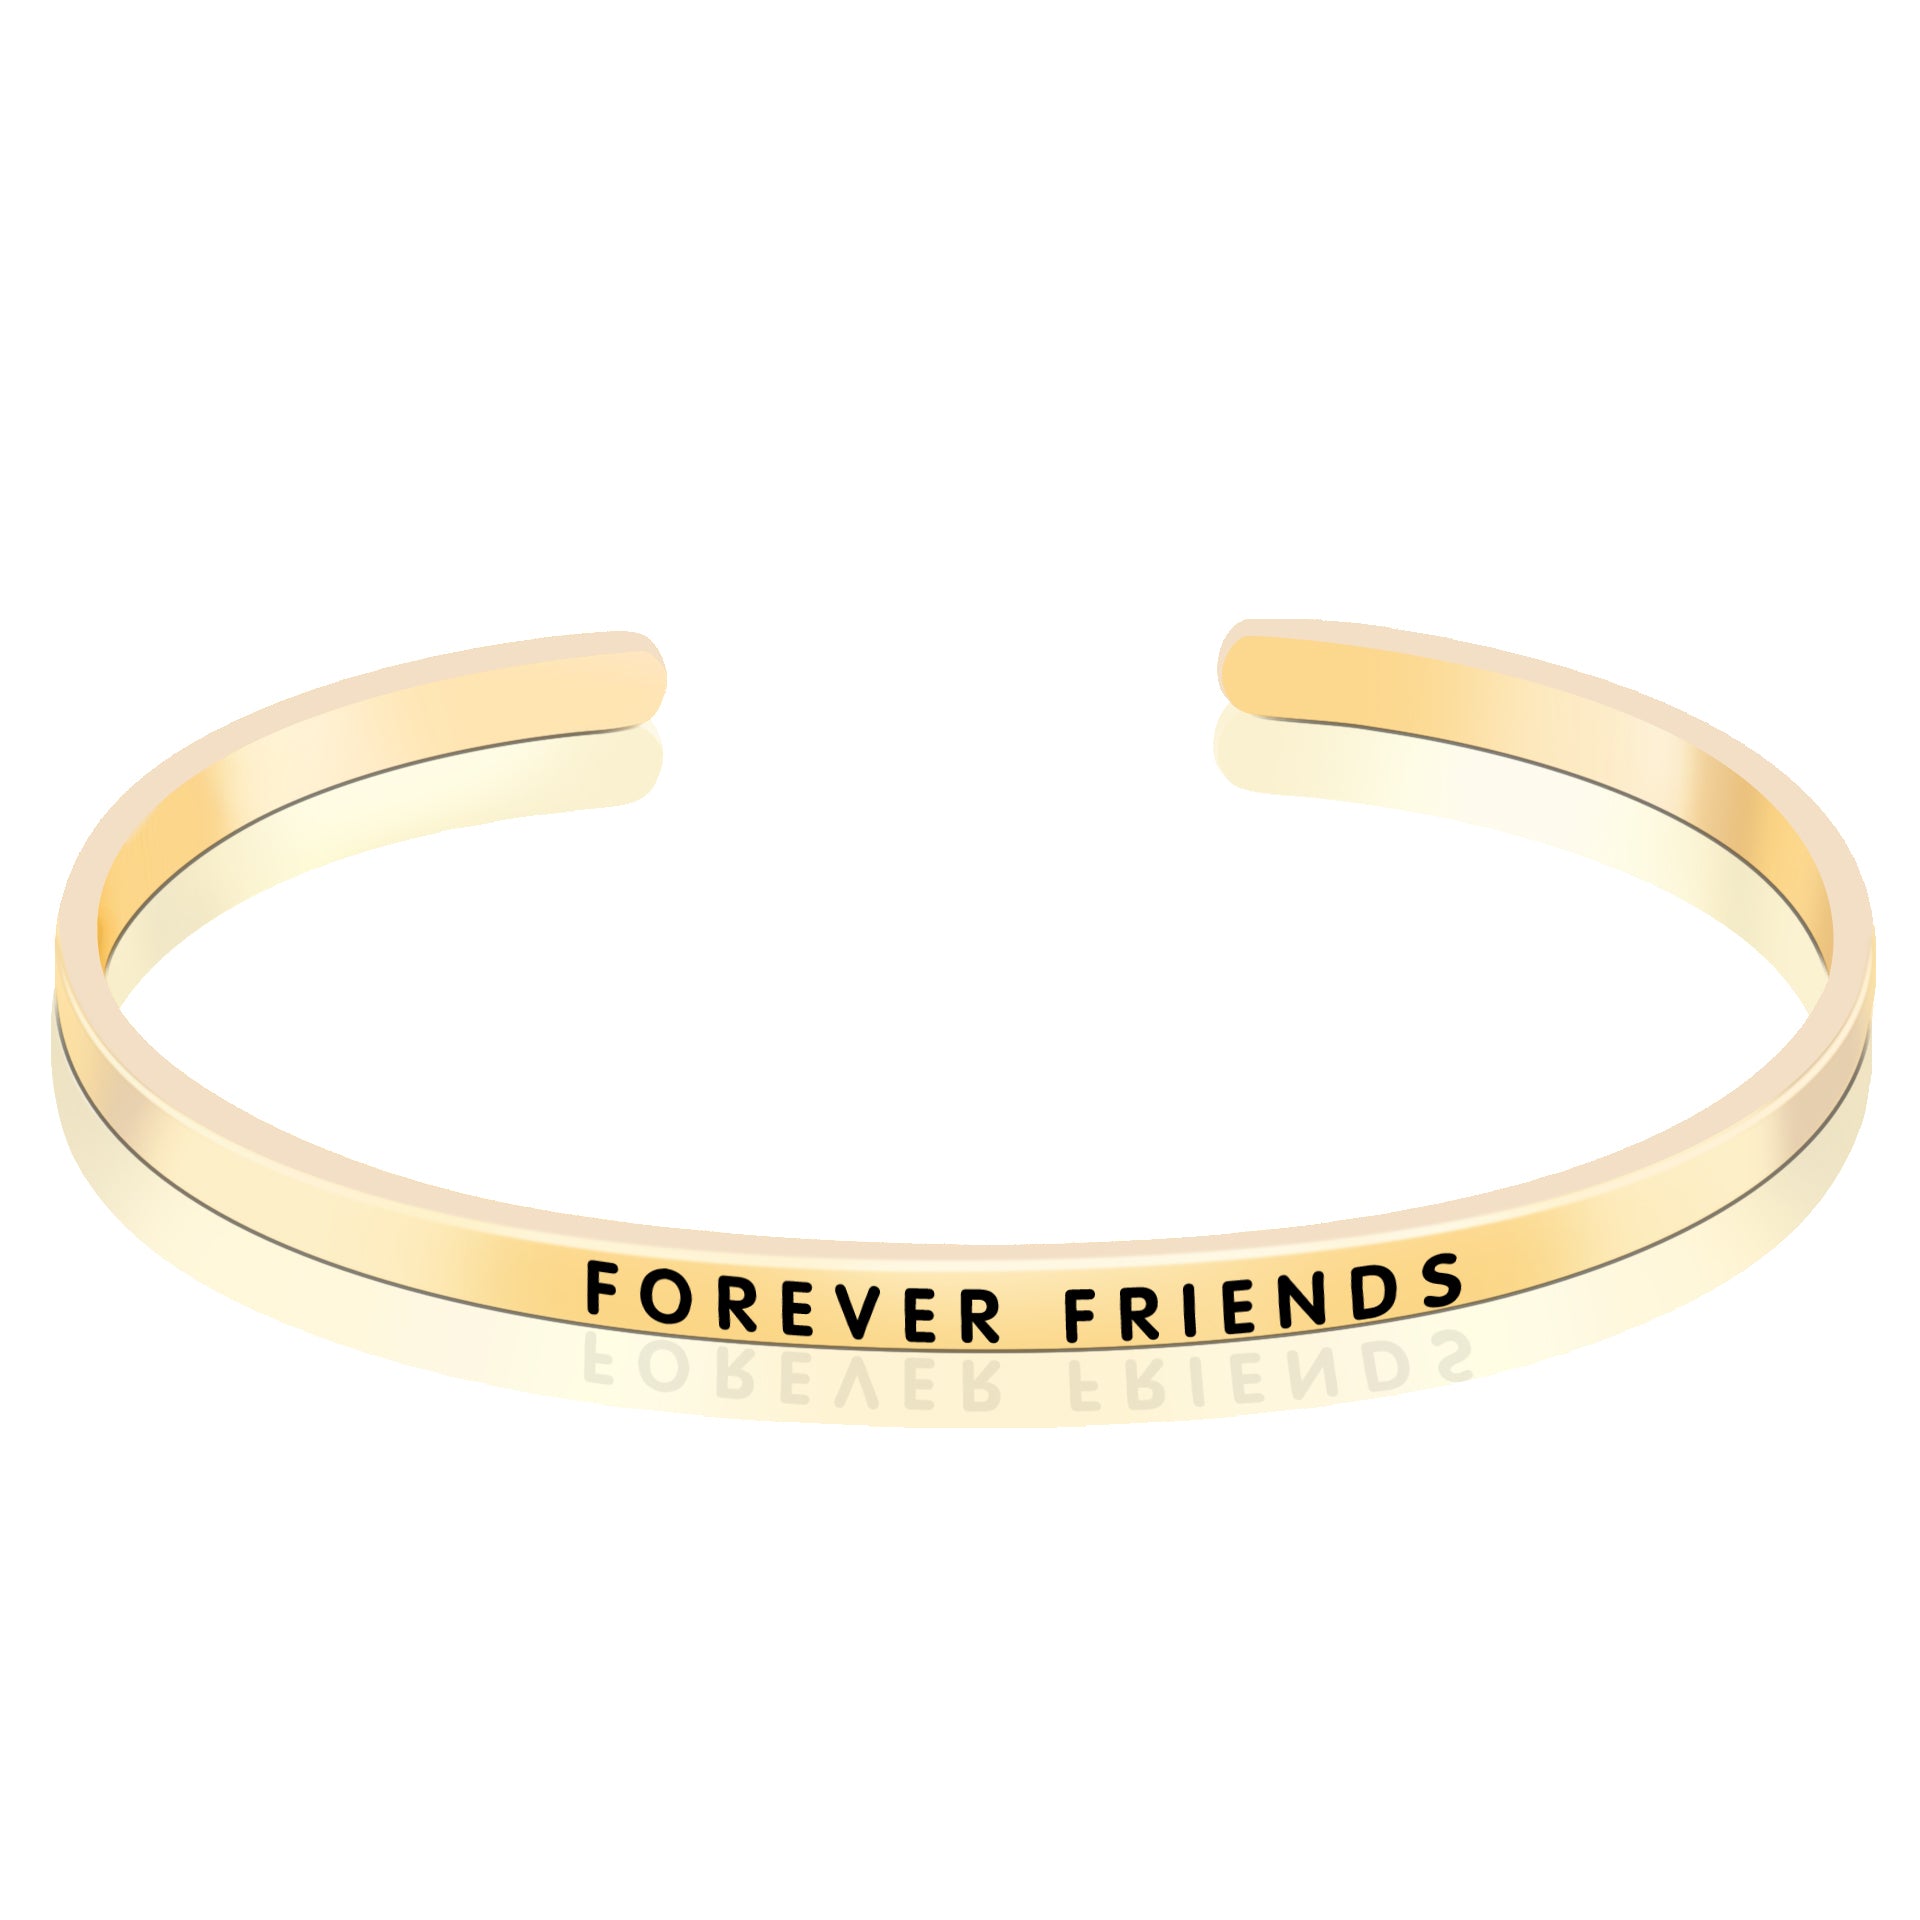 Friends Forever Bangle Design Silver Jewelry Friends Birthday Best Bangle